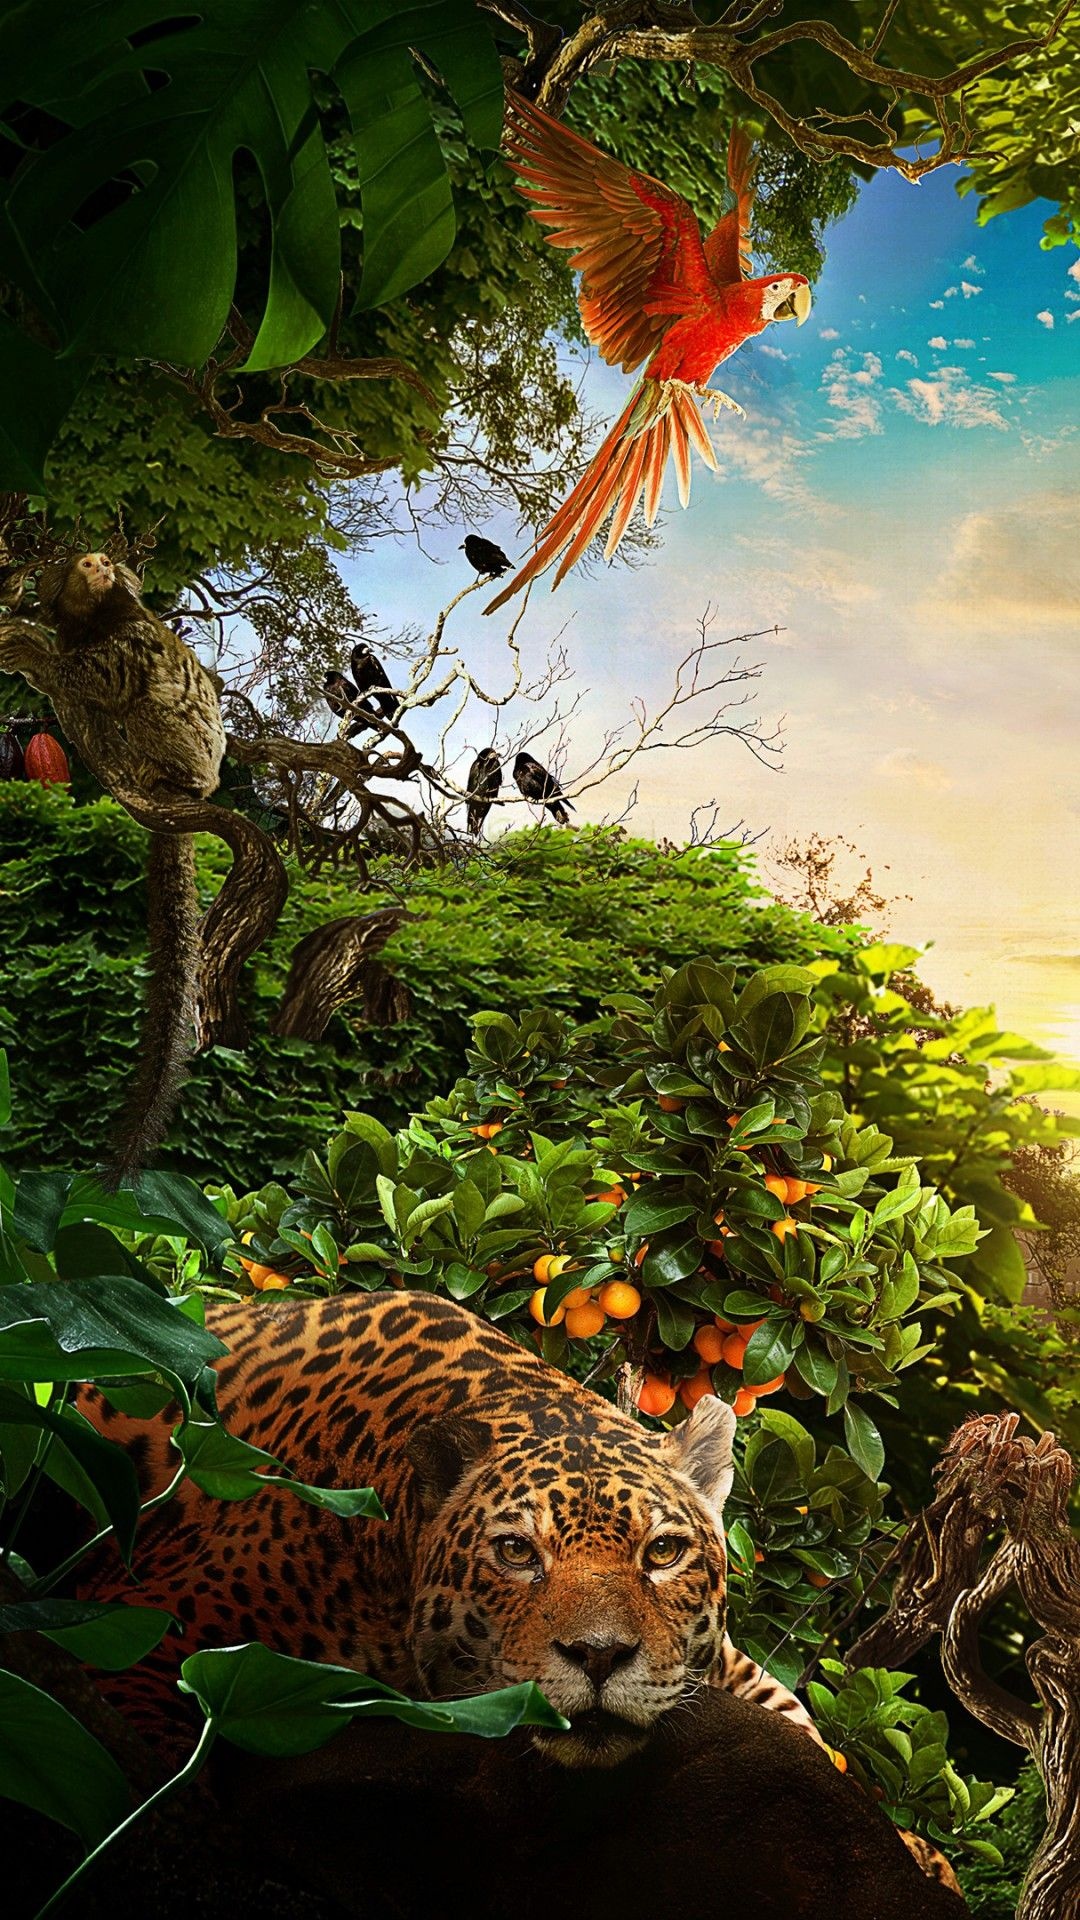 Jungle Animal, Jungle-themed iPhone wallpapers, Tropical beauty, Nature on your screen, 1080x1920 Full HD Handy